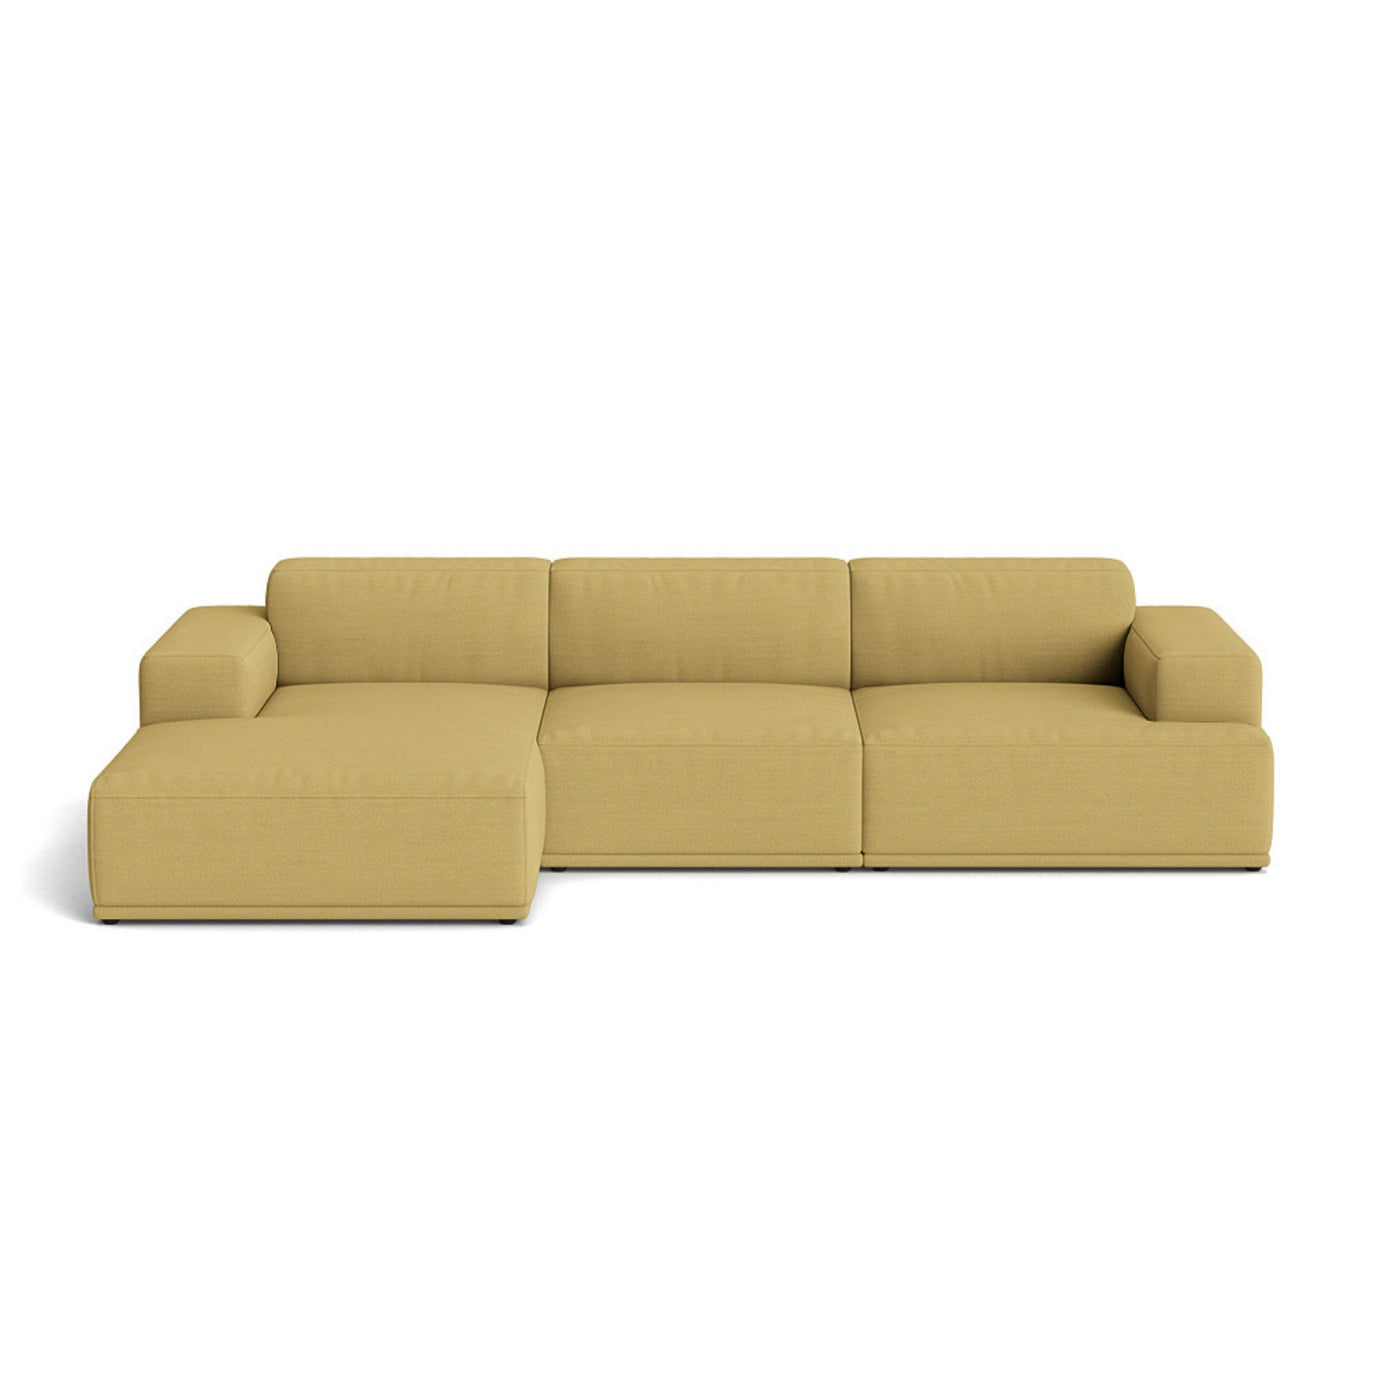 Muuto Connect Soft Modular 3 Seater Sofa, configuration 3. Made-to-order from someday designs. #colour_hallingdal-407